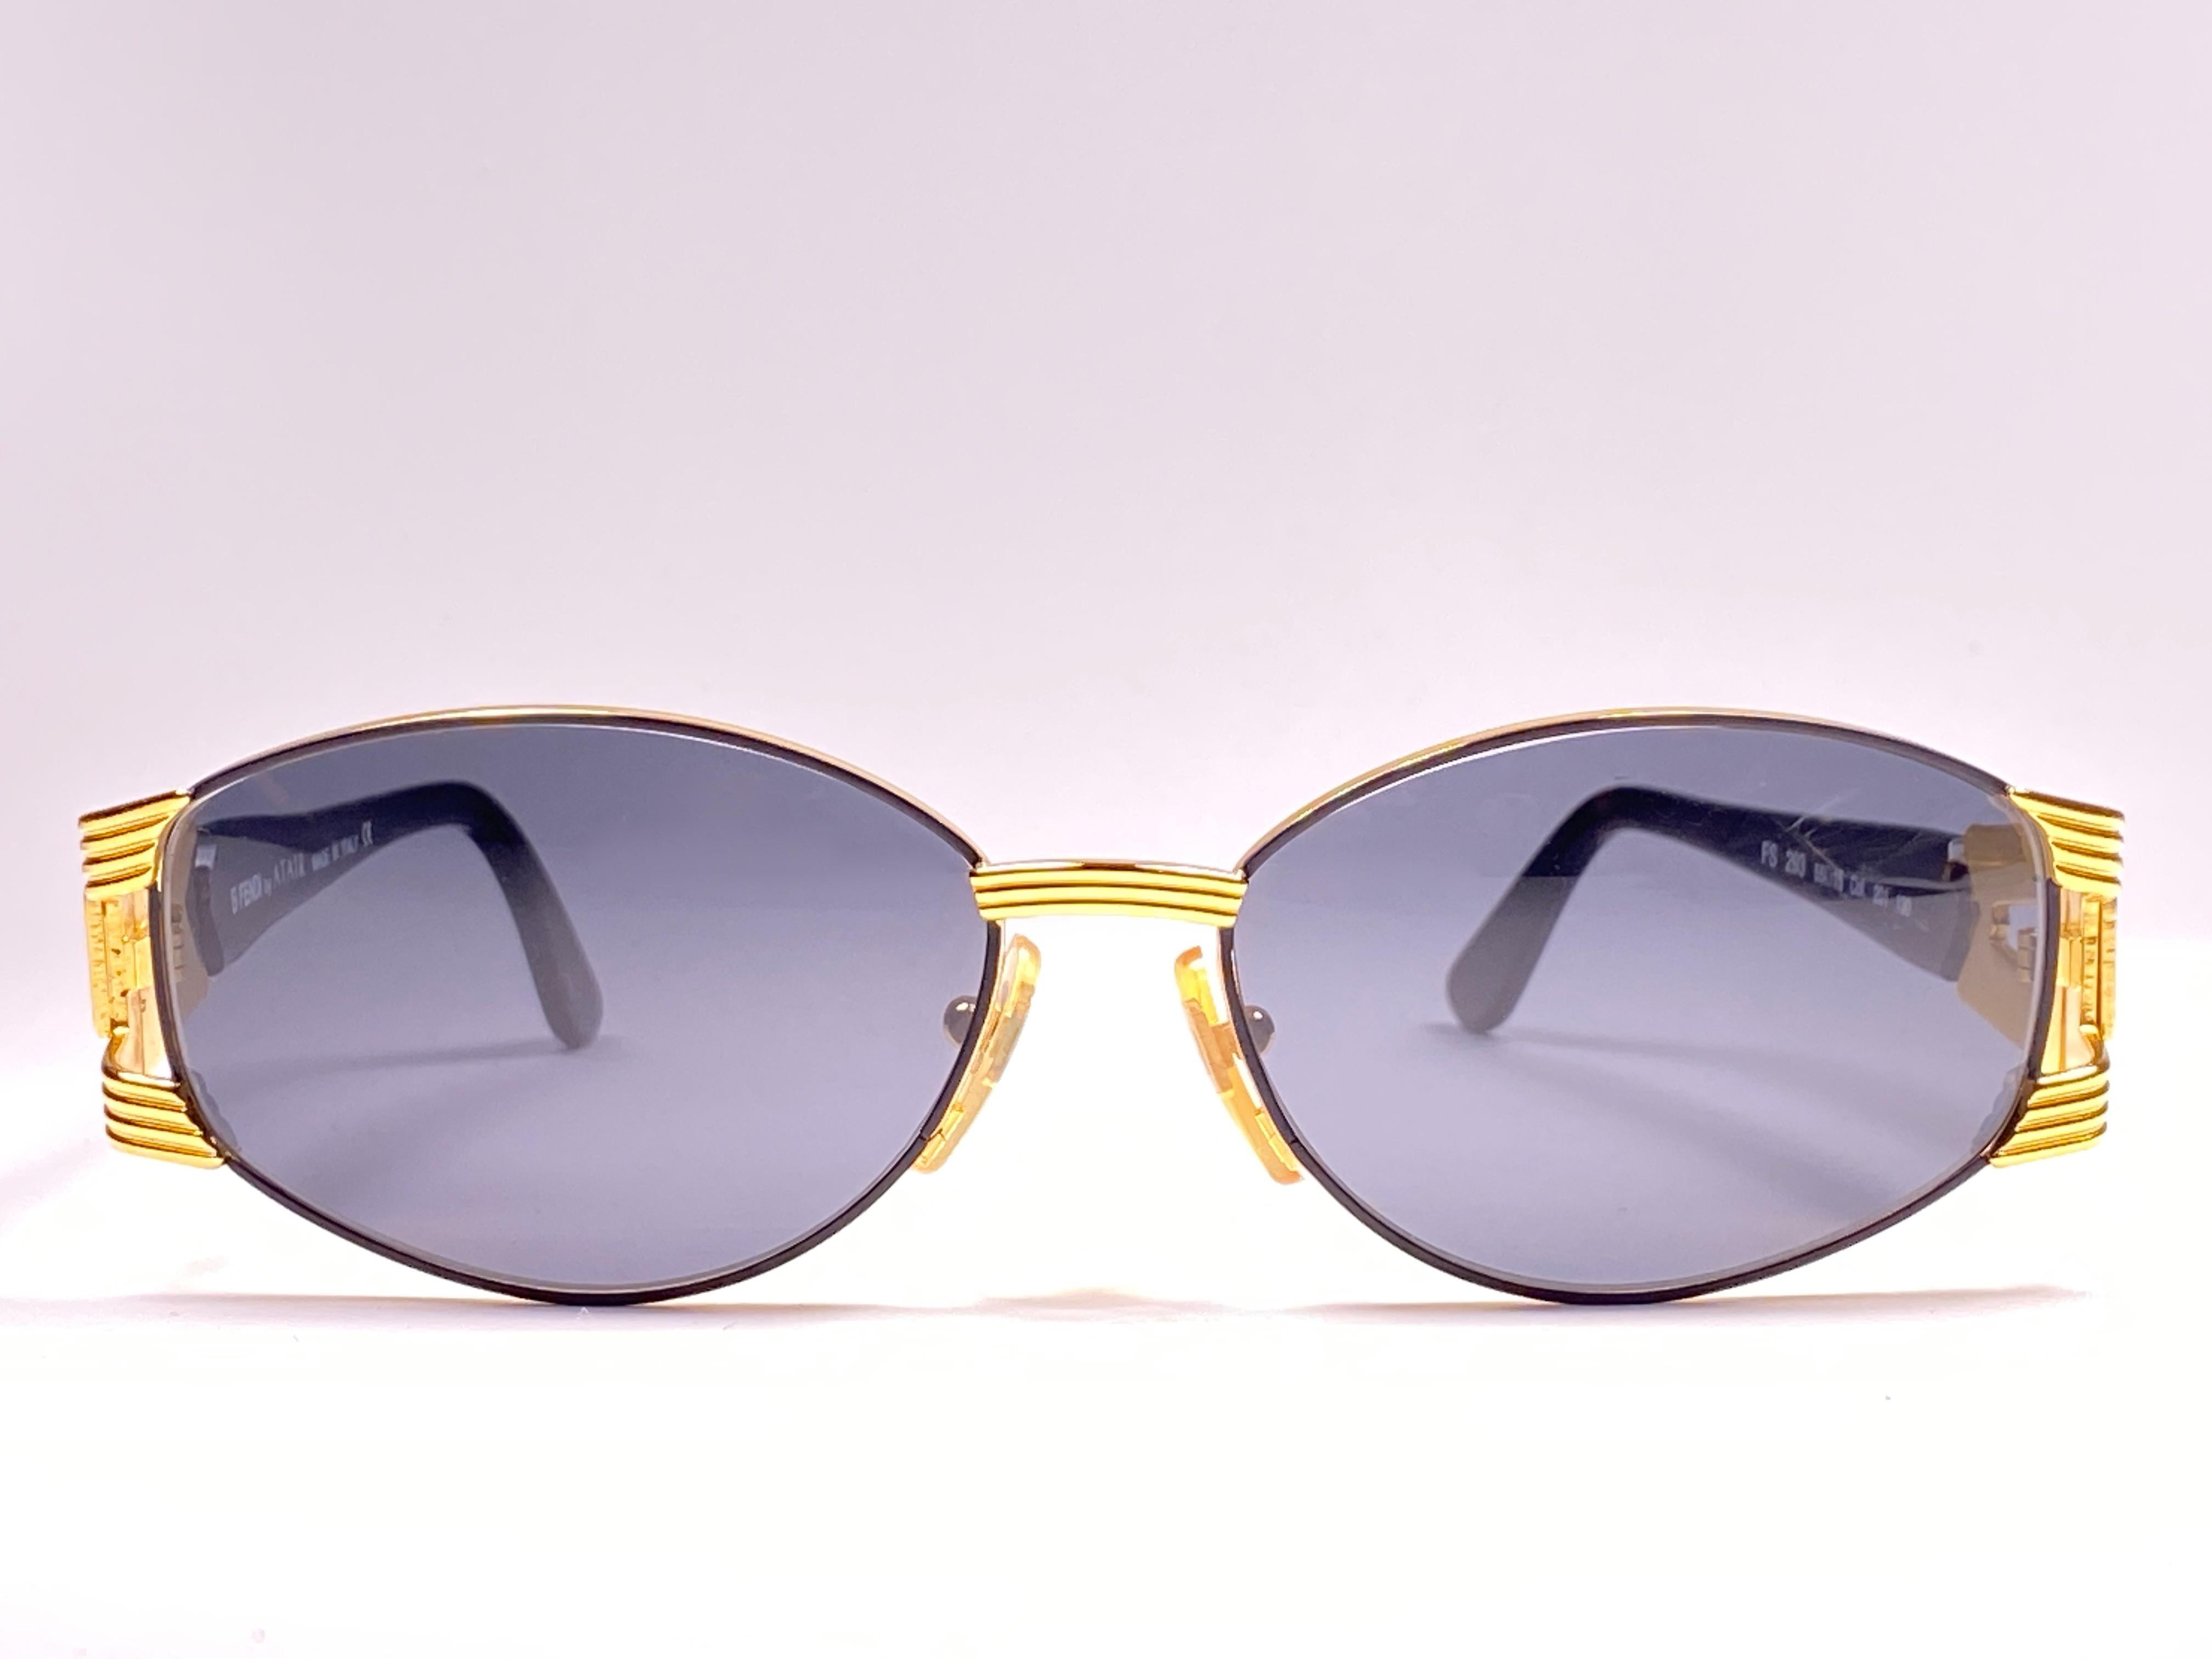 New Fendi gold oval frame with dark grey ( UV protection ) lenses.

Made in Italy.
 
Produced and design in 1990's.

New, never worn or displayed. this  item may show minor sign of wear due to storage.